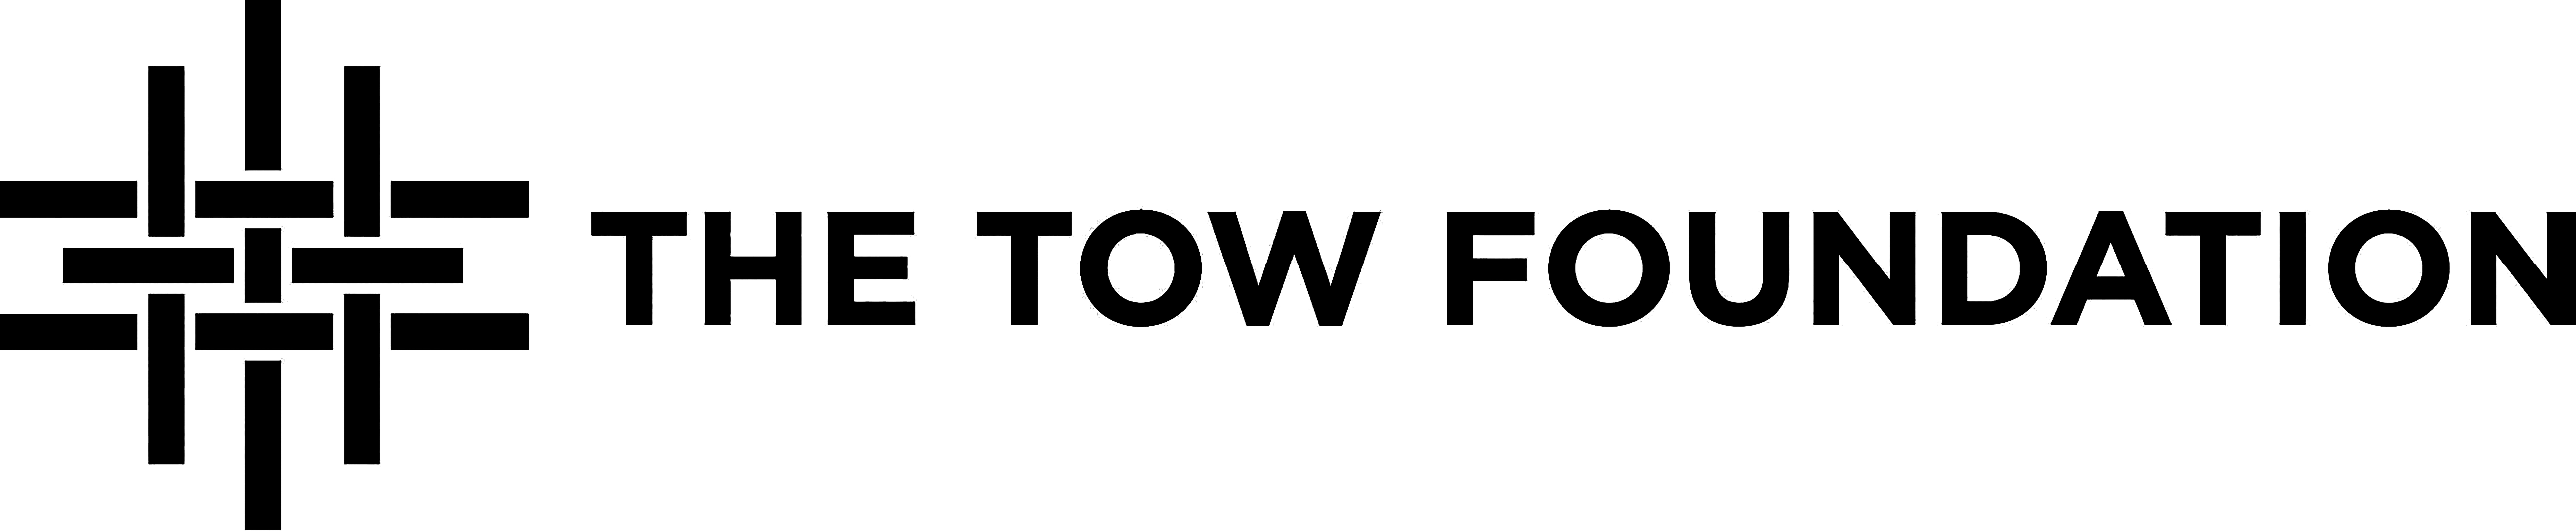 The Tow Foundation